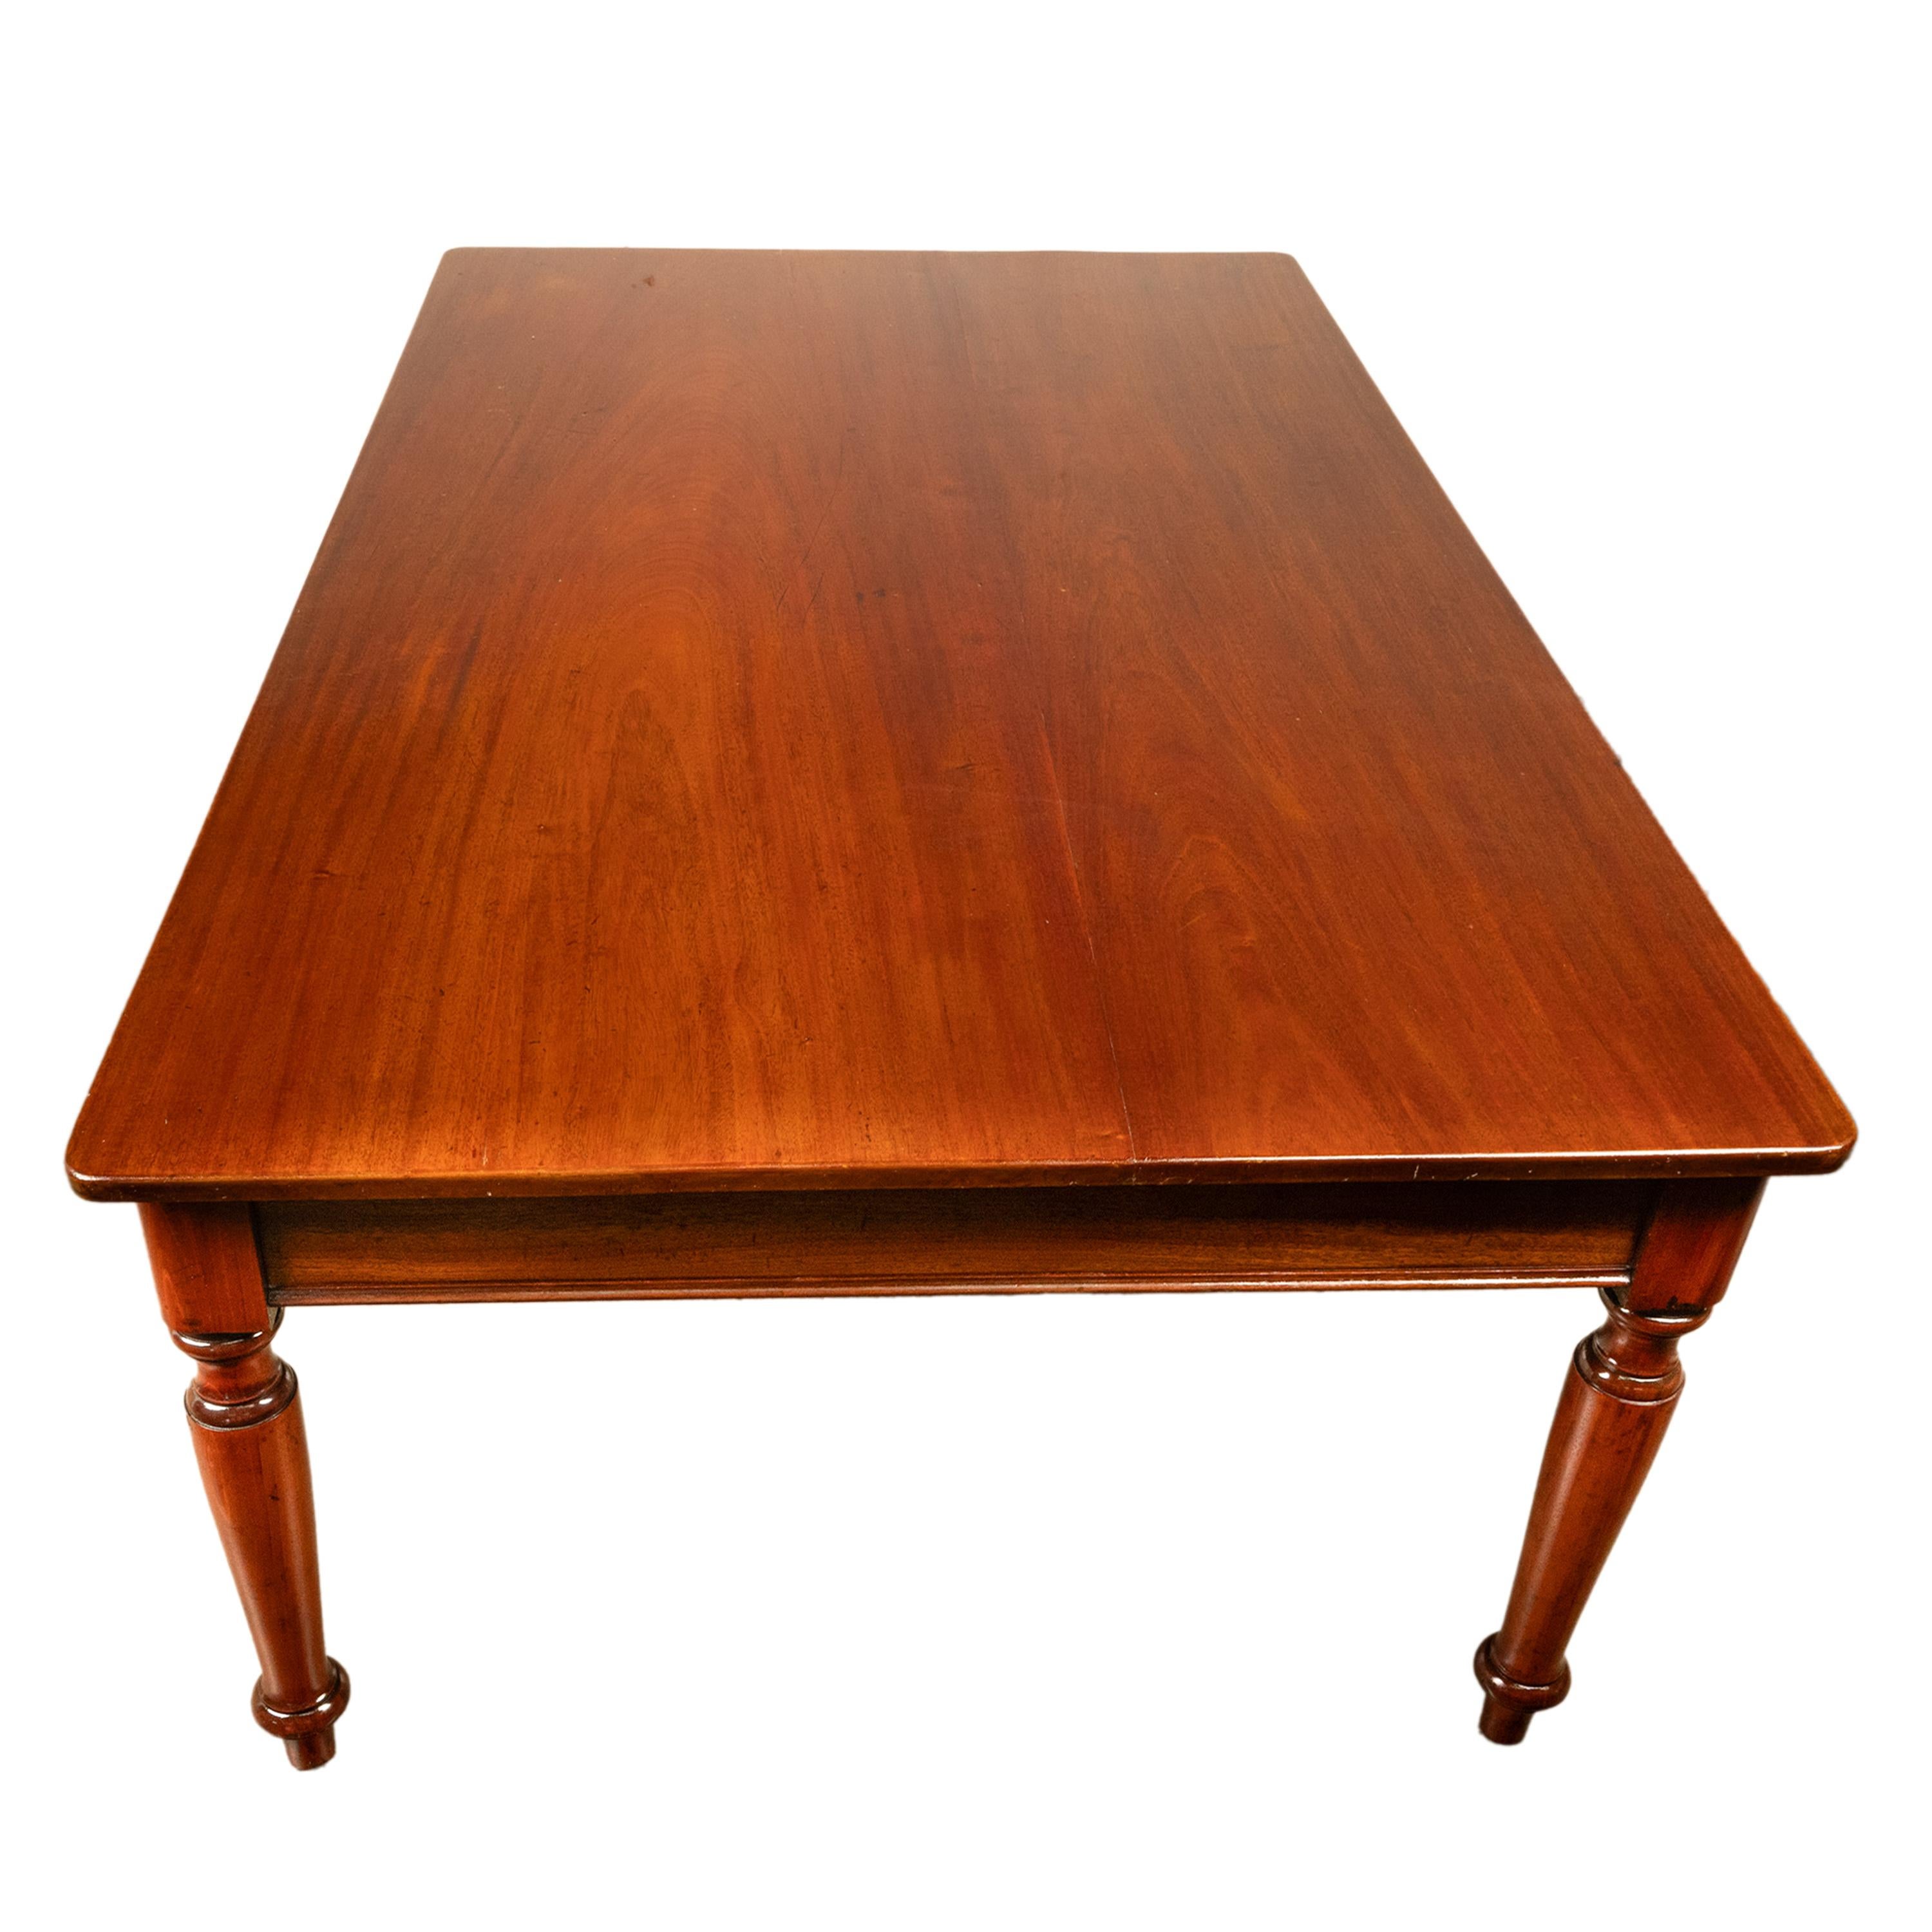 Antique Monumental 19th Century Mahogany Library Conference Dining Table 1860 For Sale 5